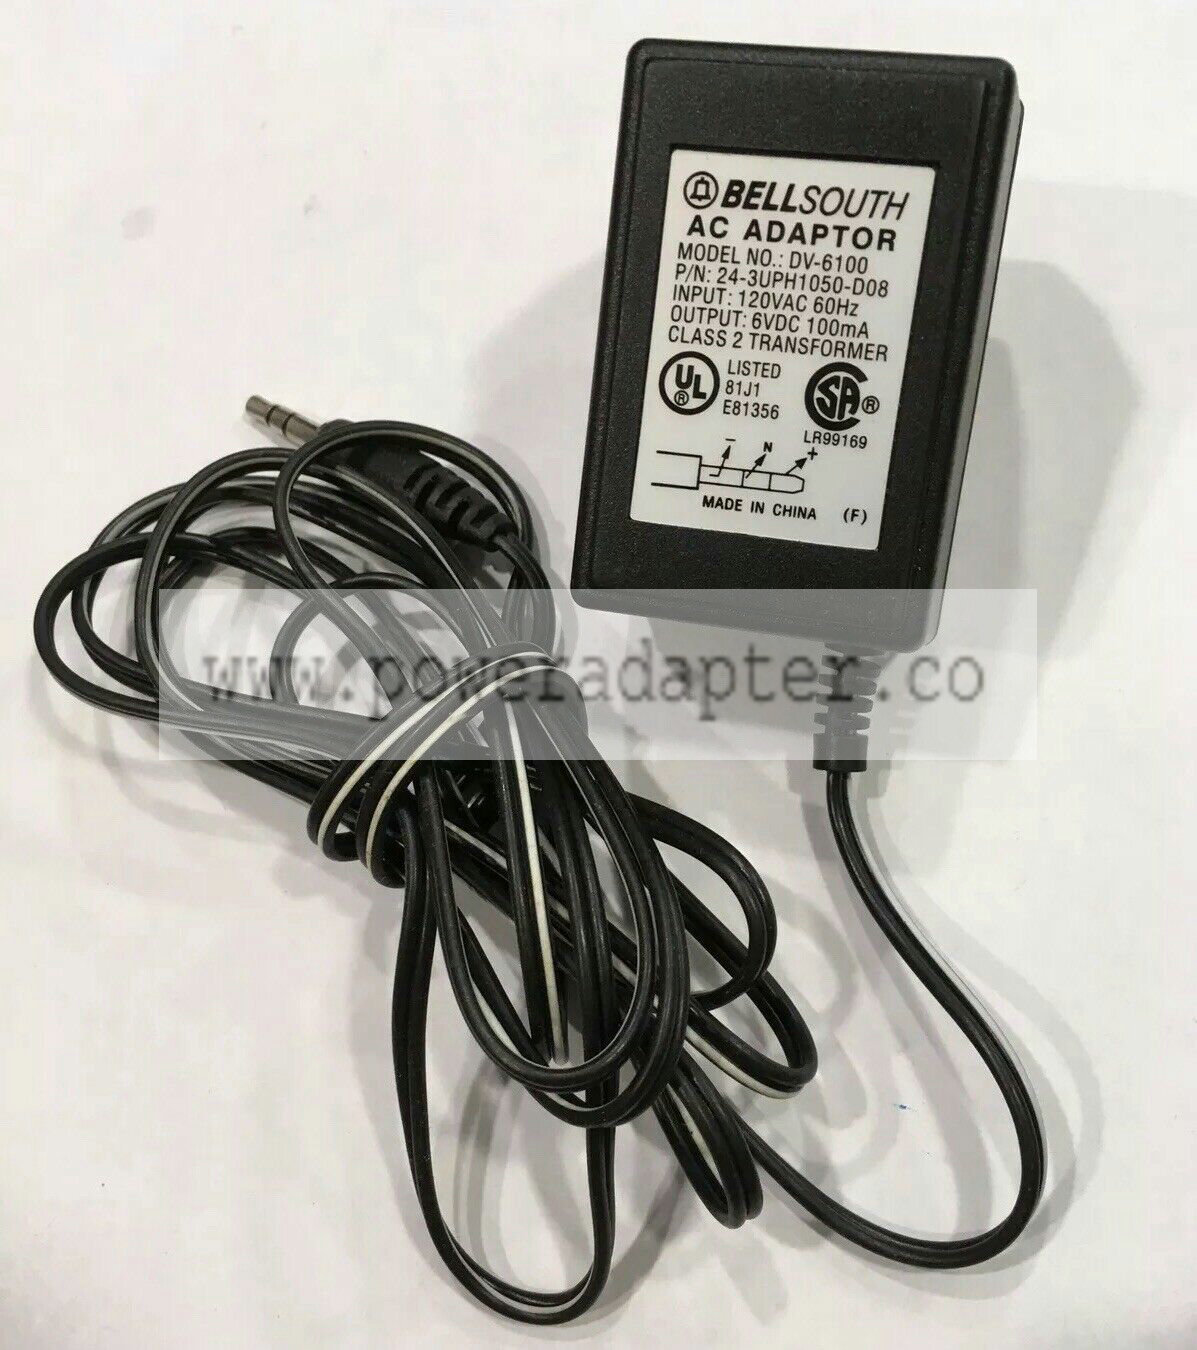 DV-6100 BELL SOUTH PHONE 6VDC 100MA POWER ADAPTER CORD Brand: Bell South MPN: DV-6100 UPC: Does not apply Great